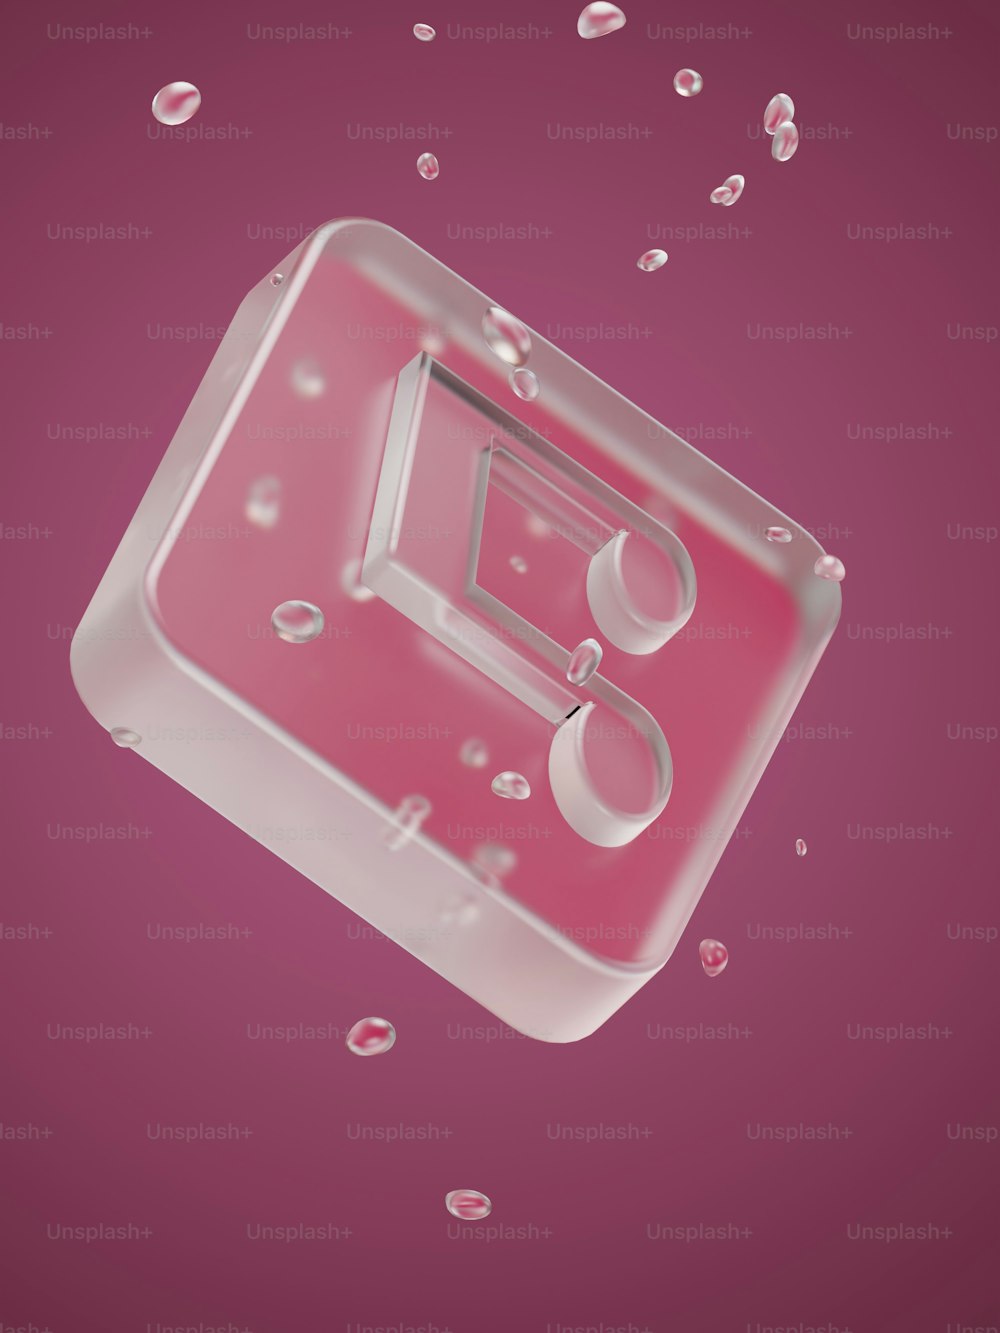 a square object with bubbles floating around it